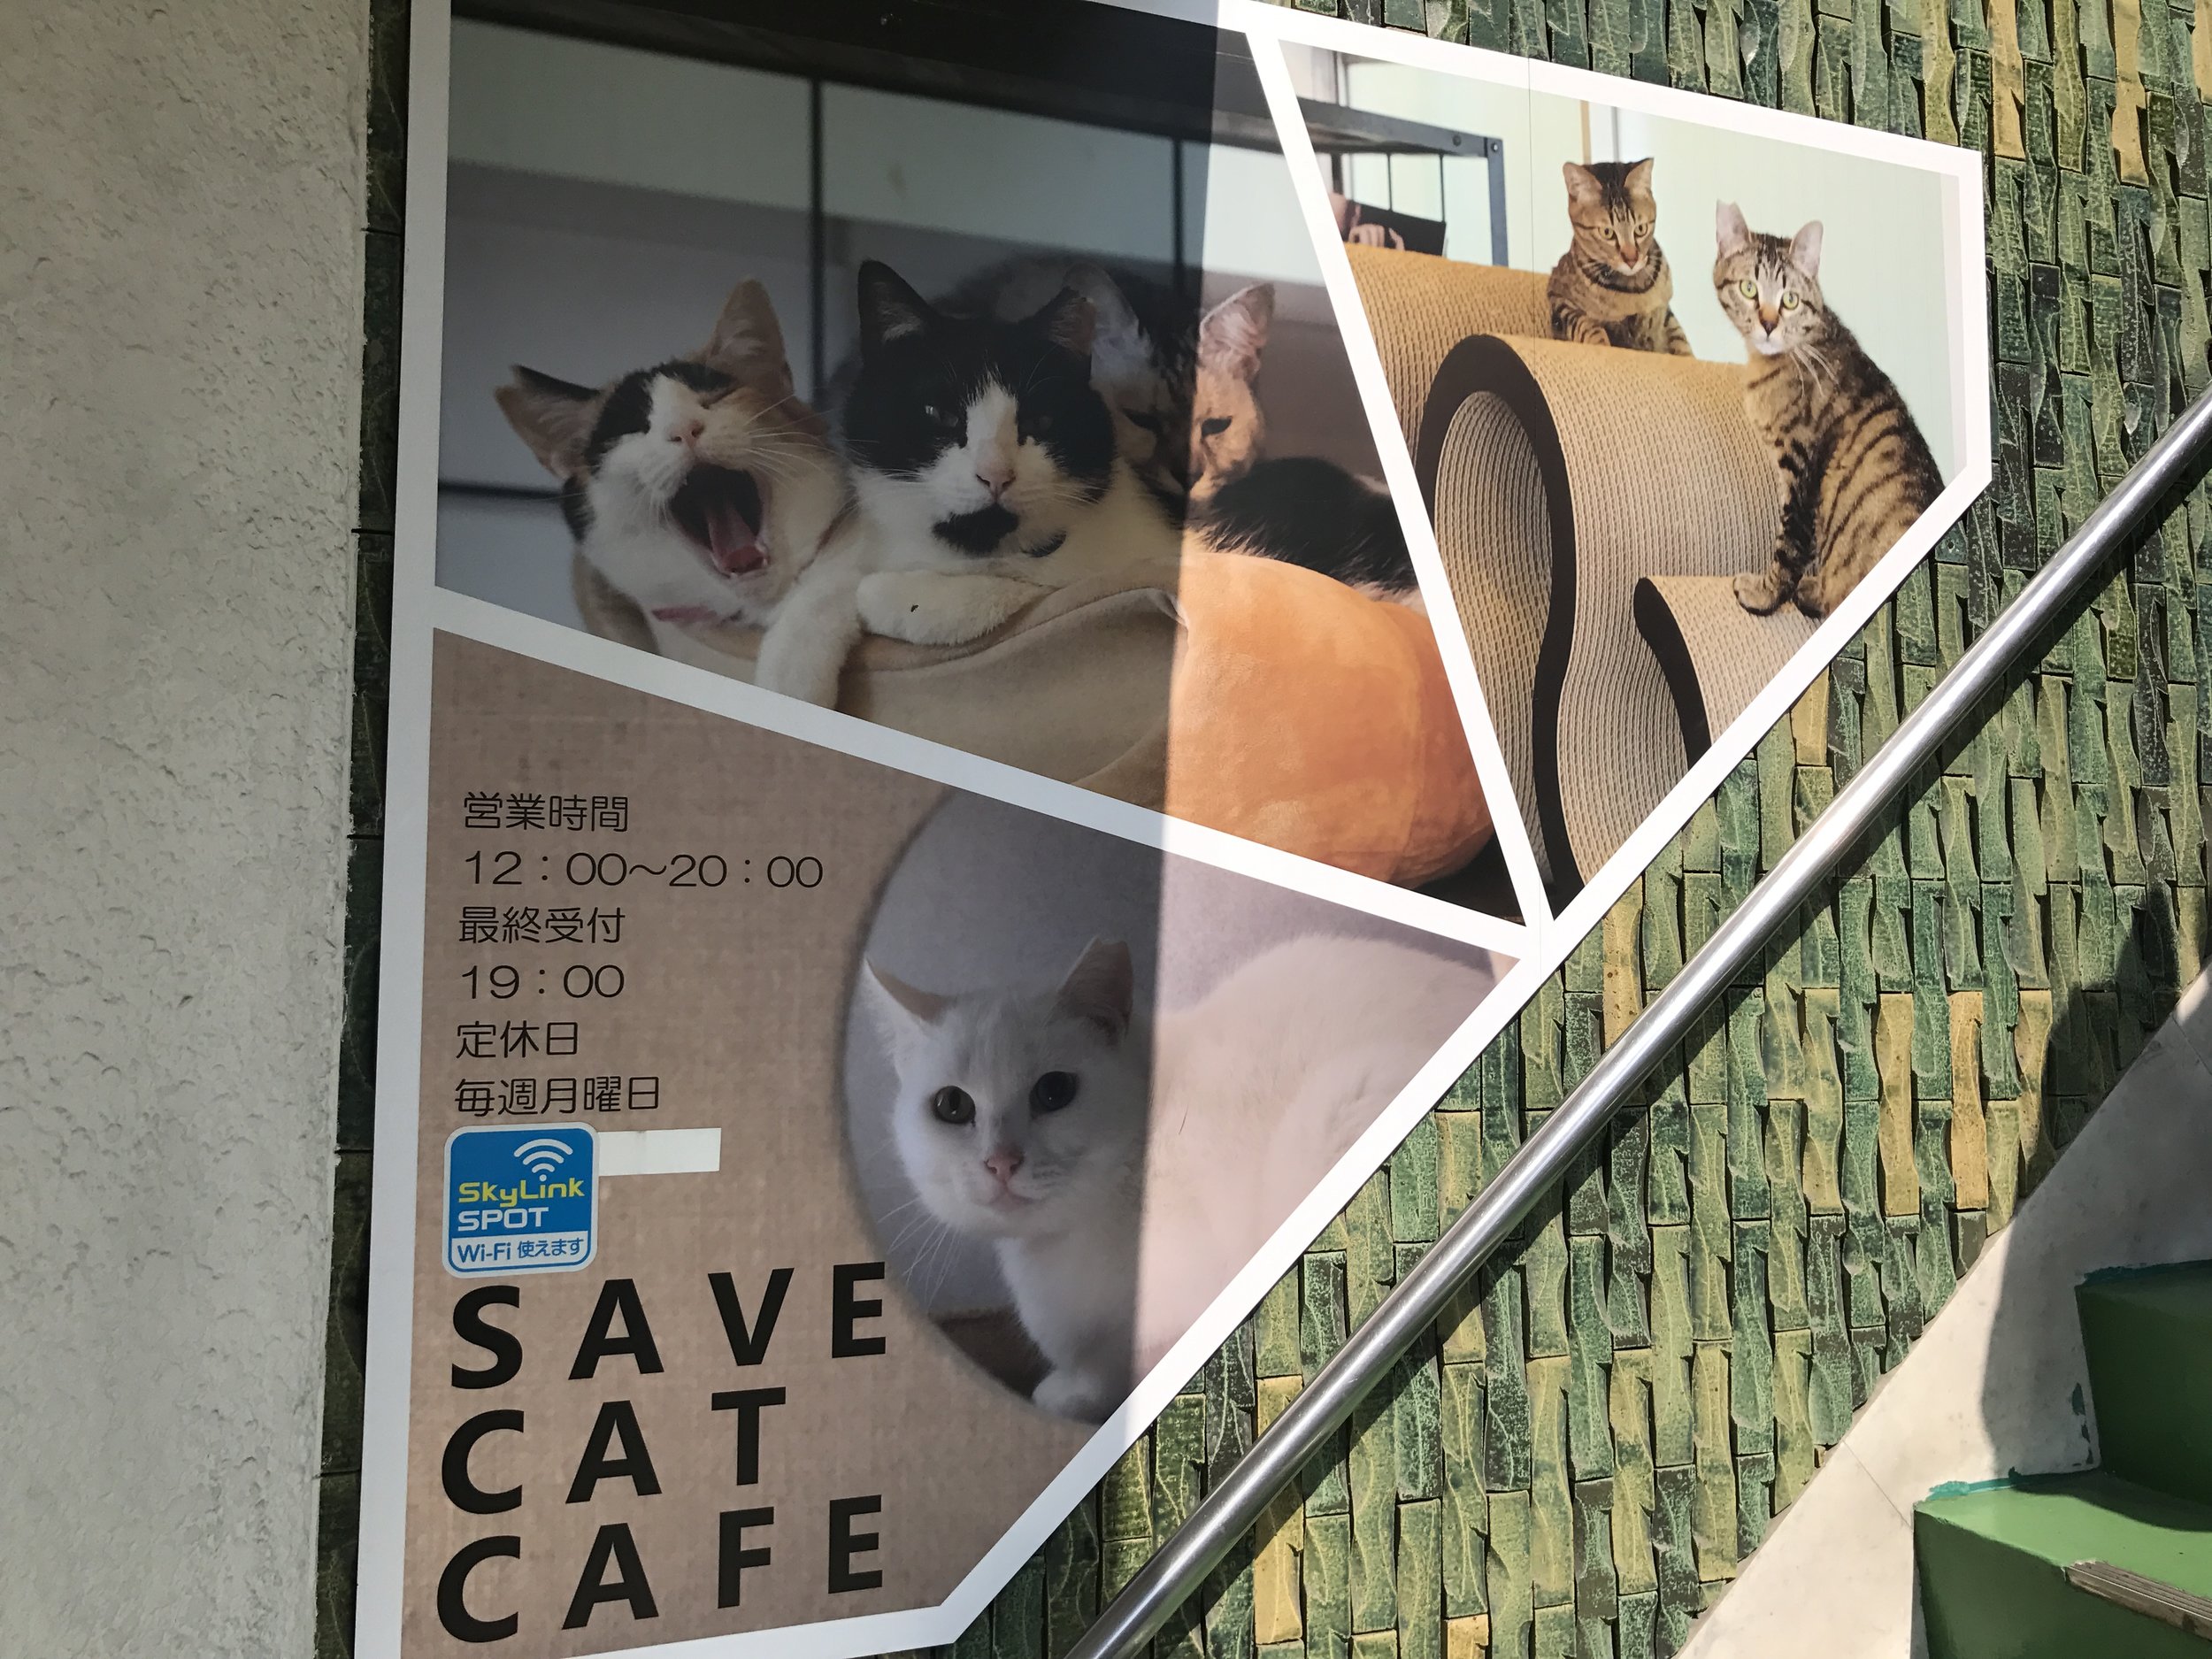 Save Cat Cafe is located near the Tenma metro station in Osaka, Japan